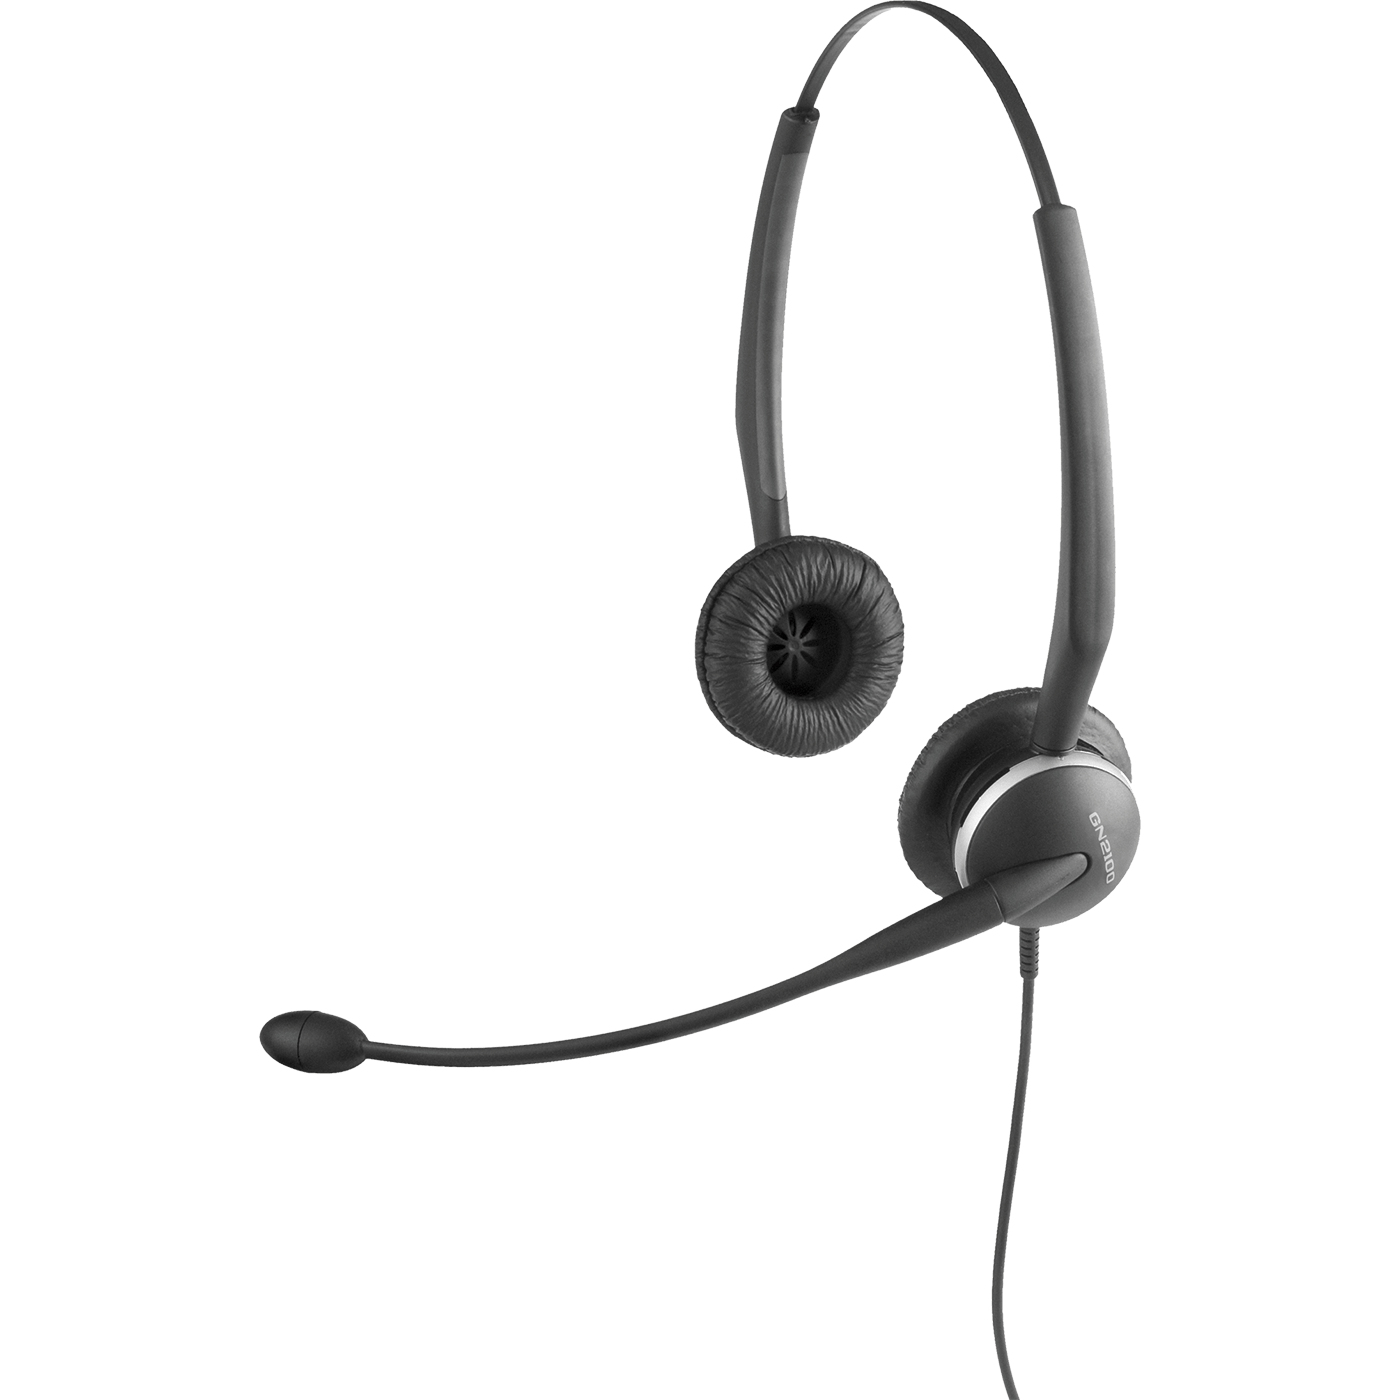 Jabra GN 2100 Telecoil - Headset - On-ear - Wired 2127-80-54 - C2000